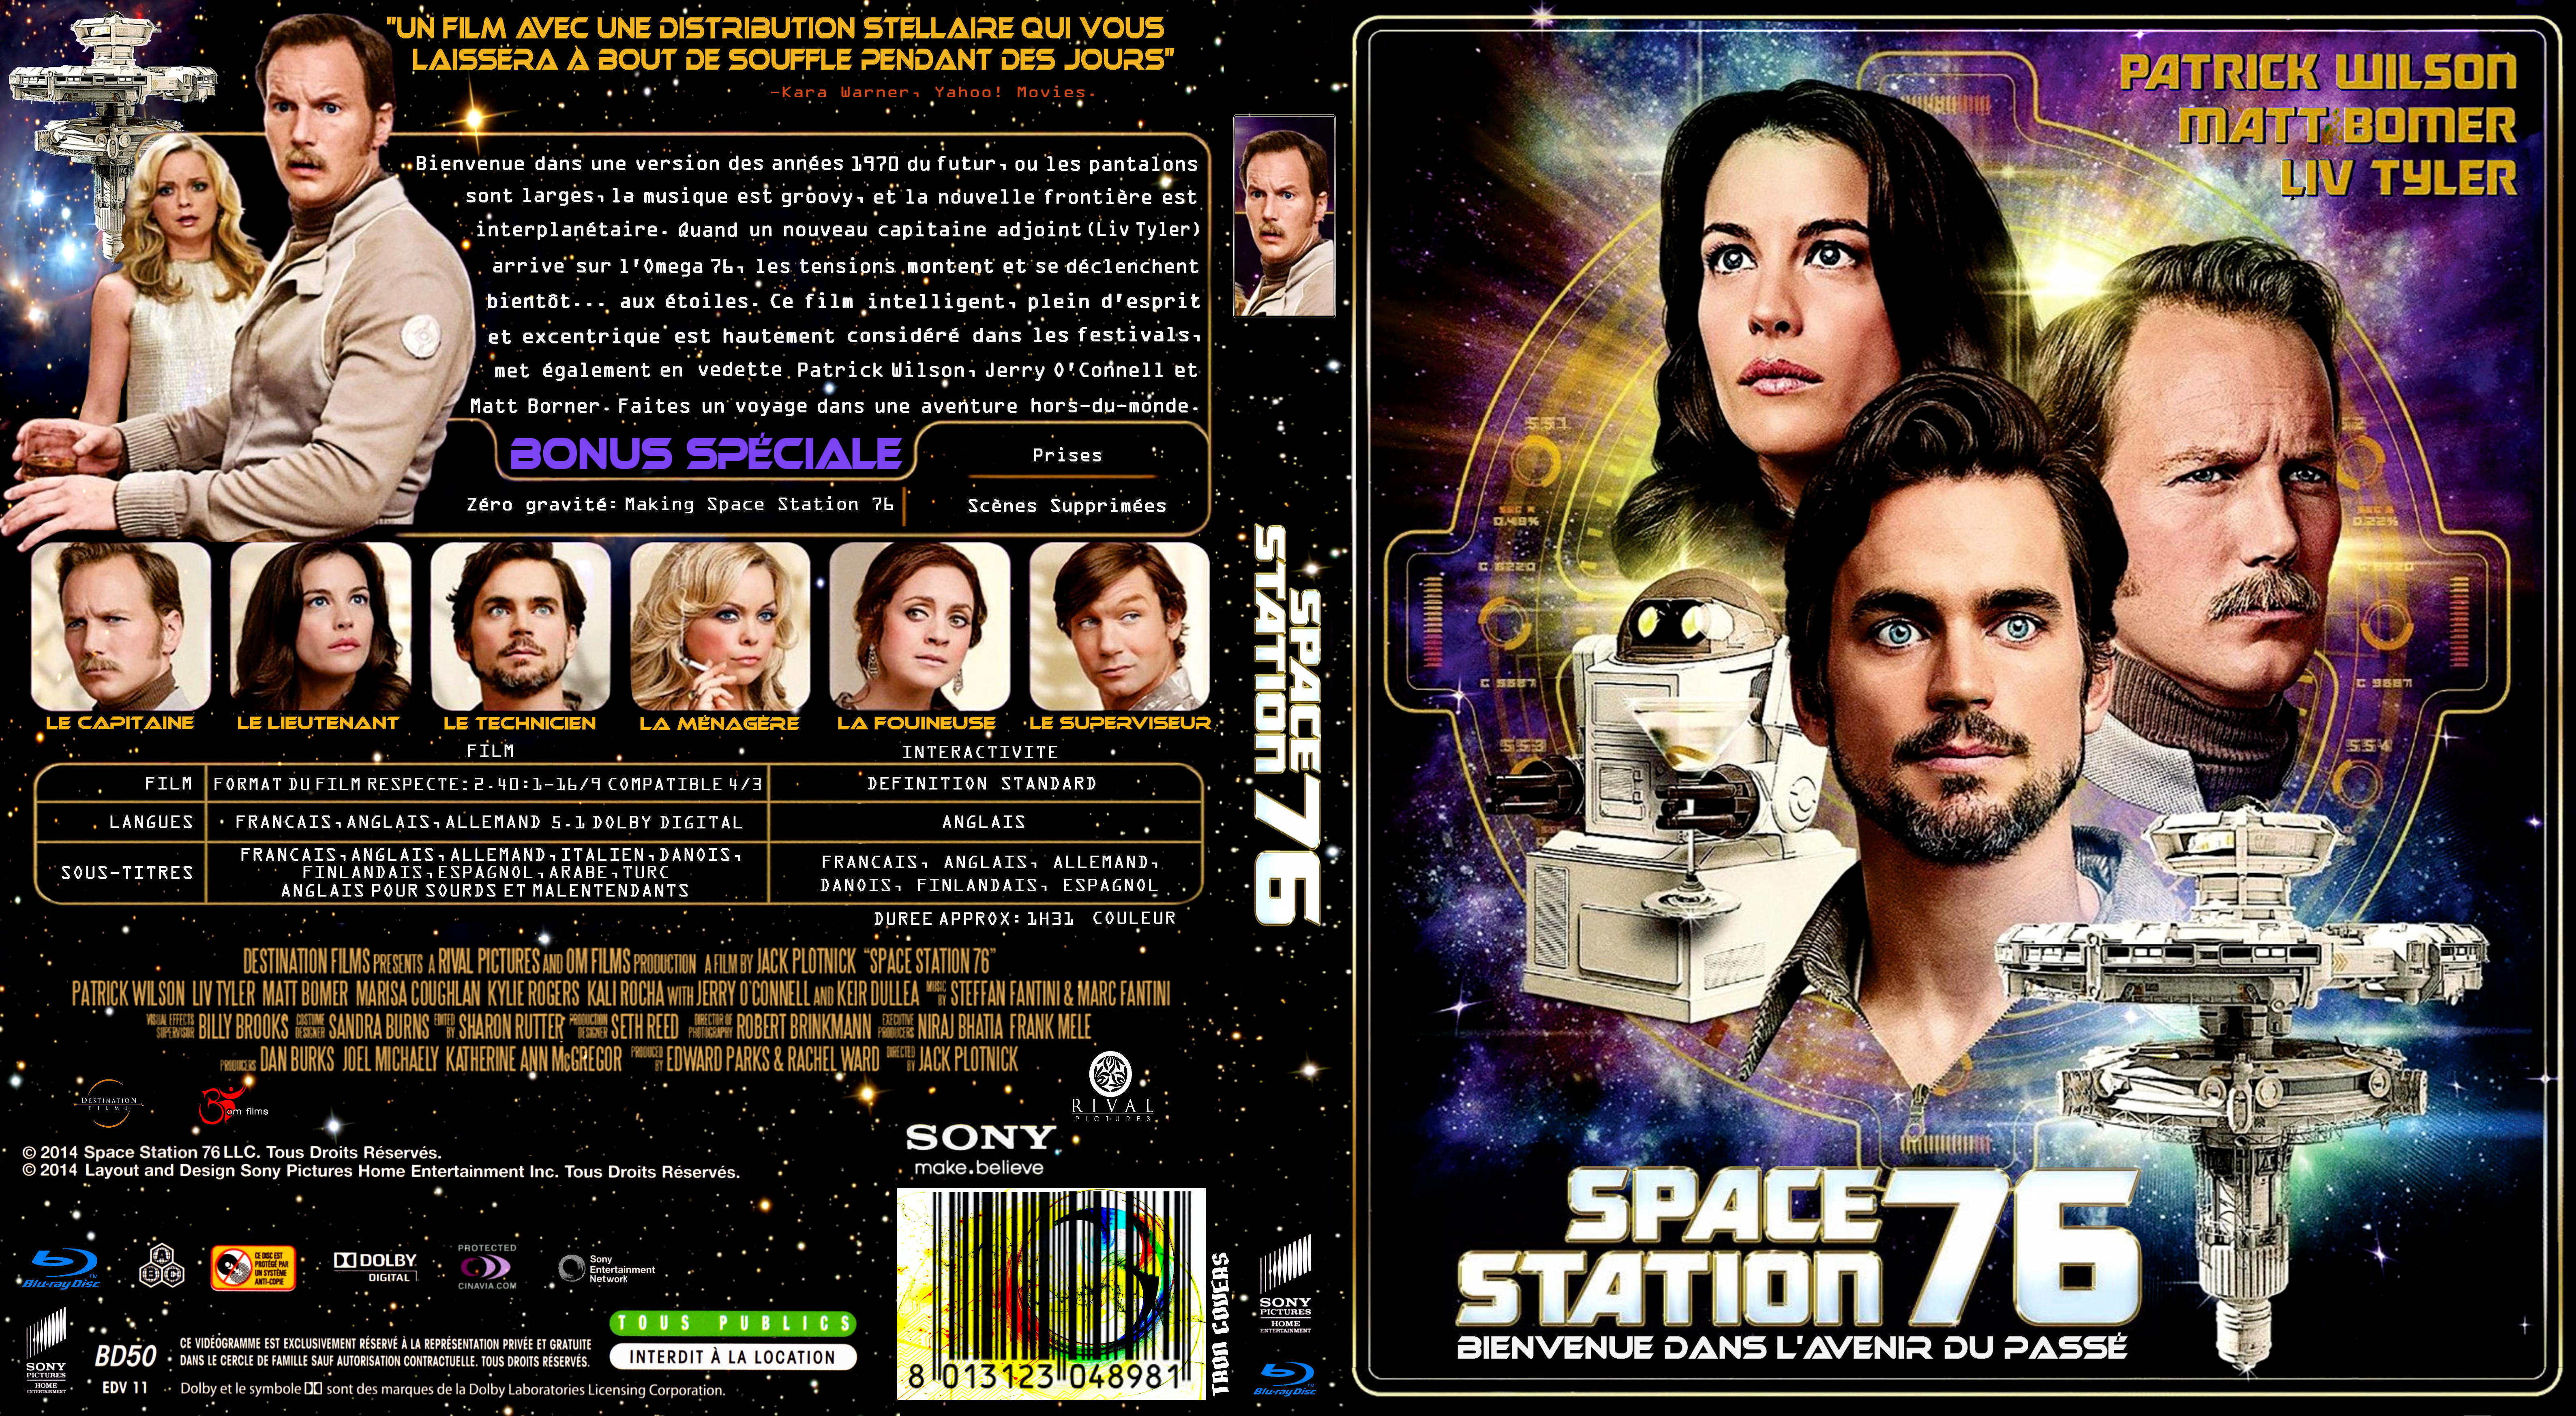 Jaquette DVD Space Station 76 custom (BLU-RAY)